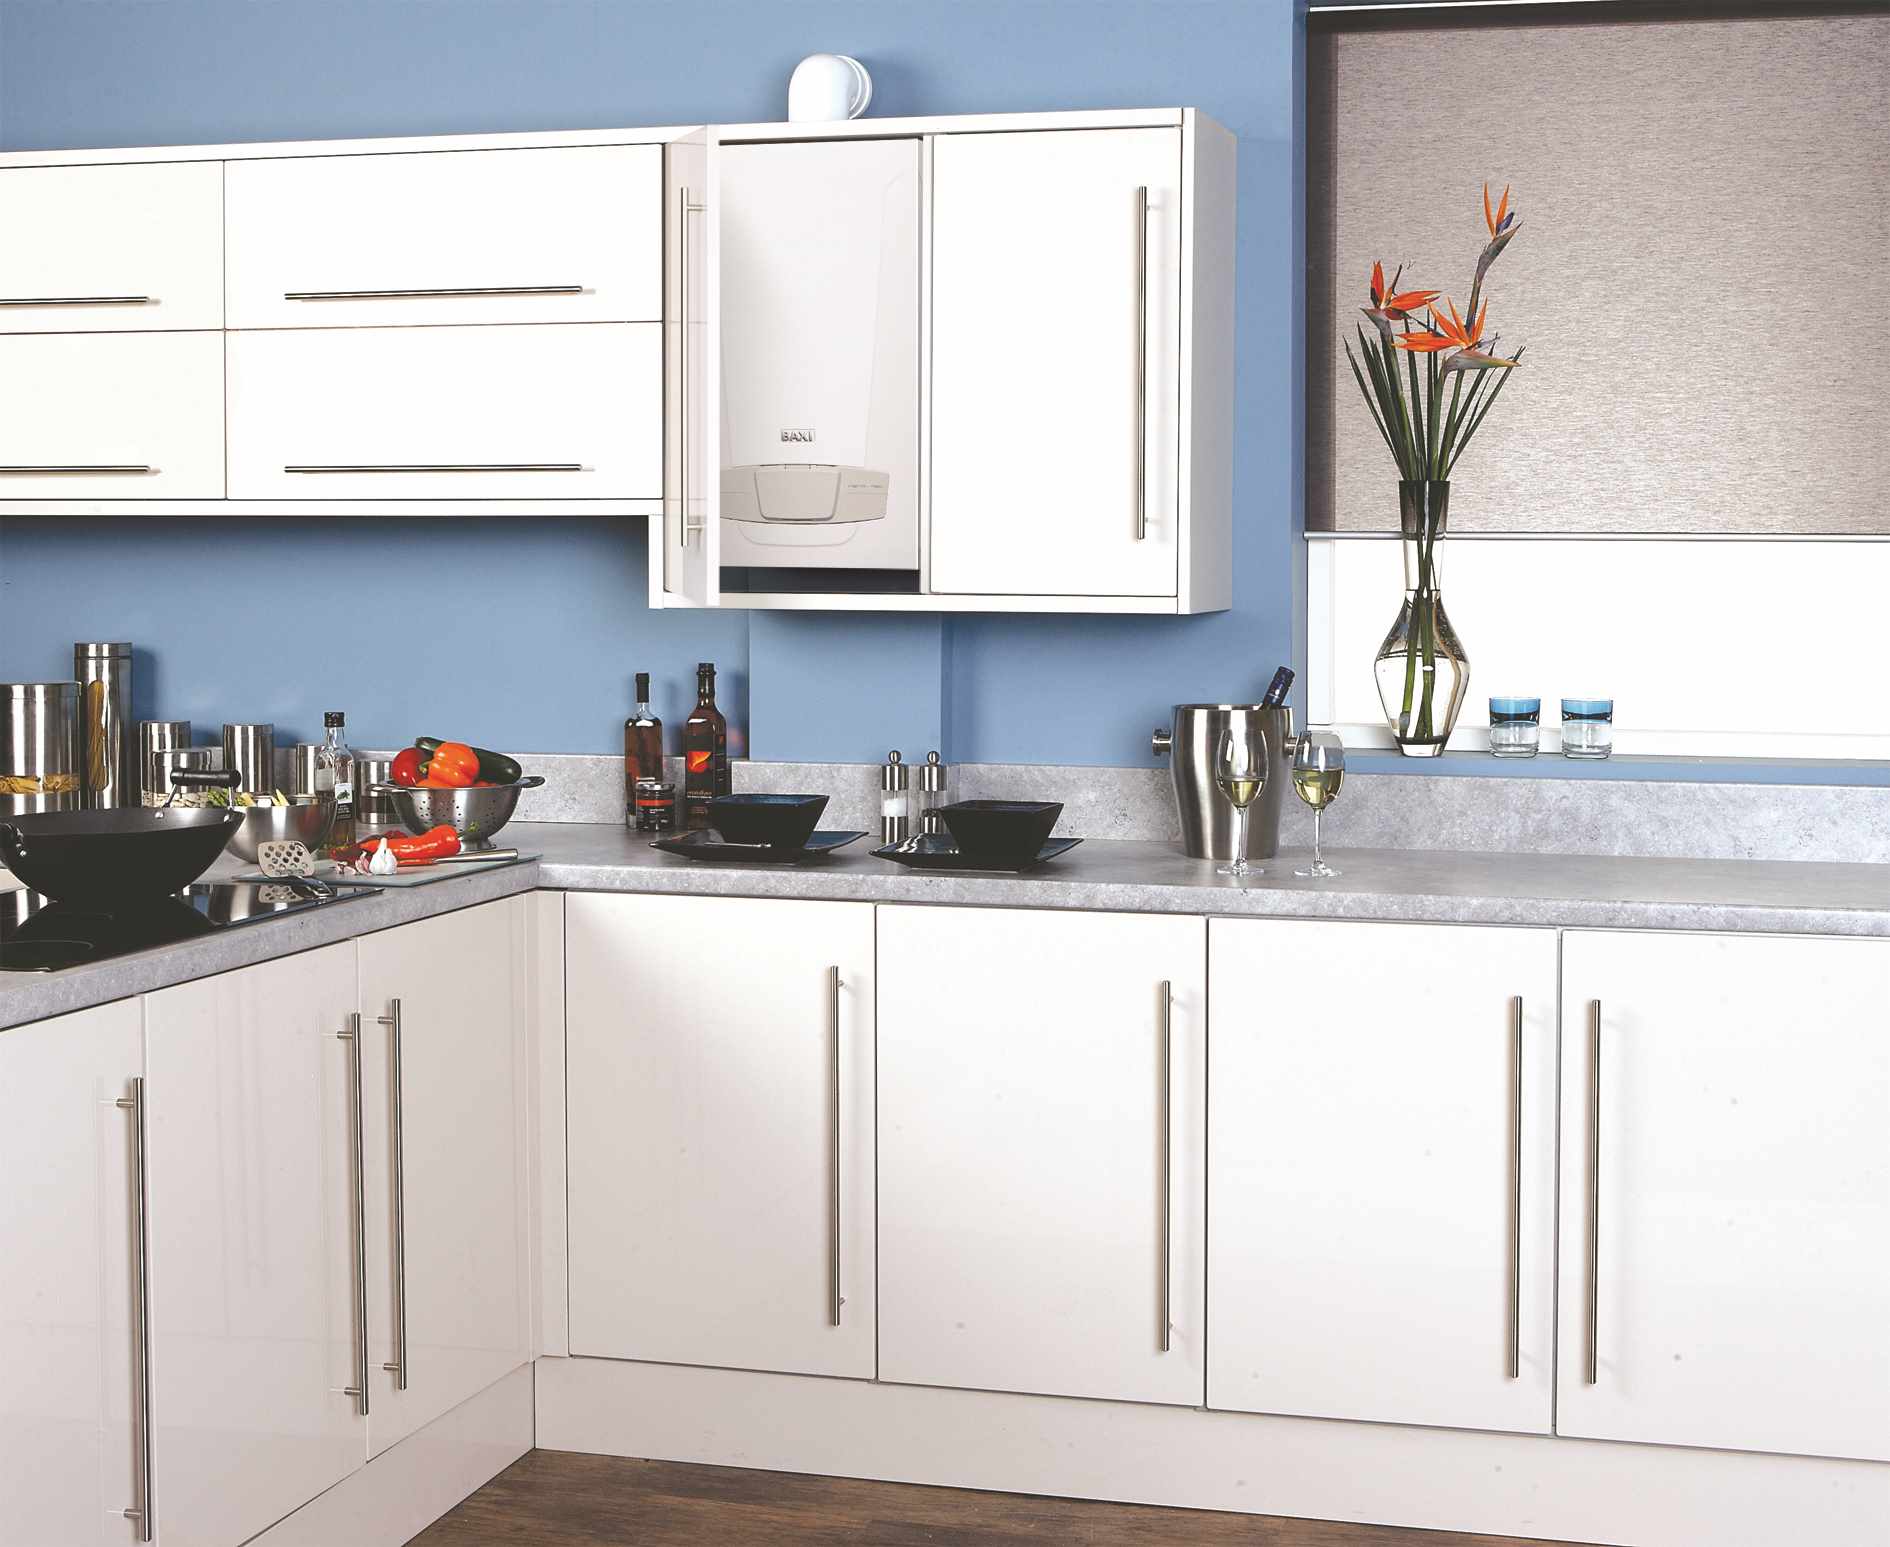 version of a beautiful kitchen design with a gas boiler